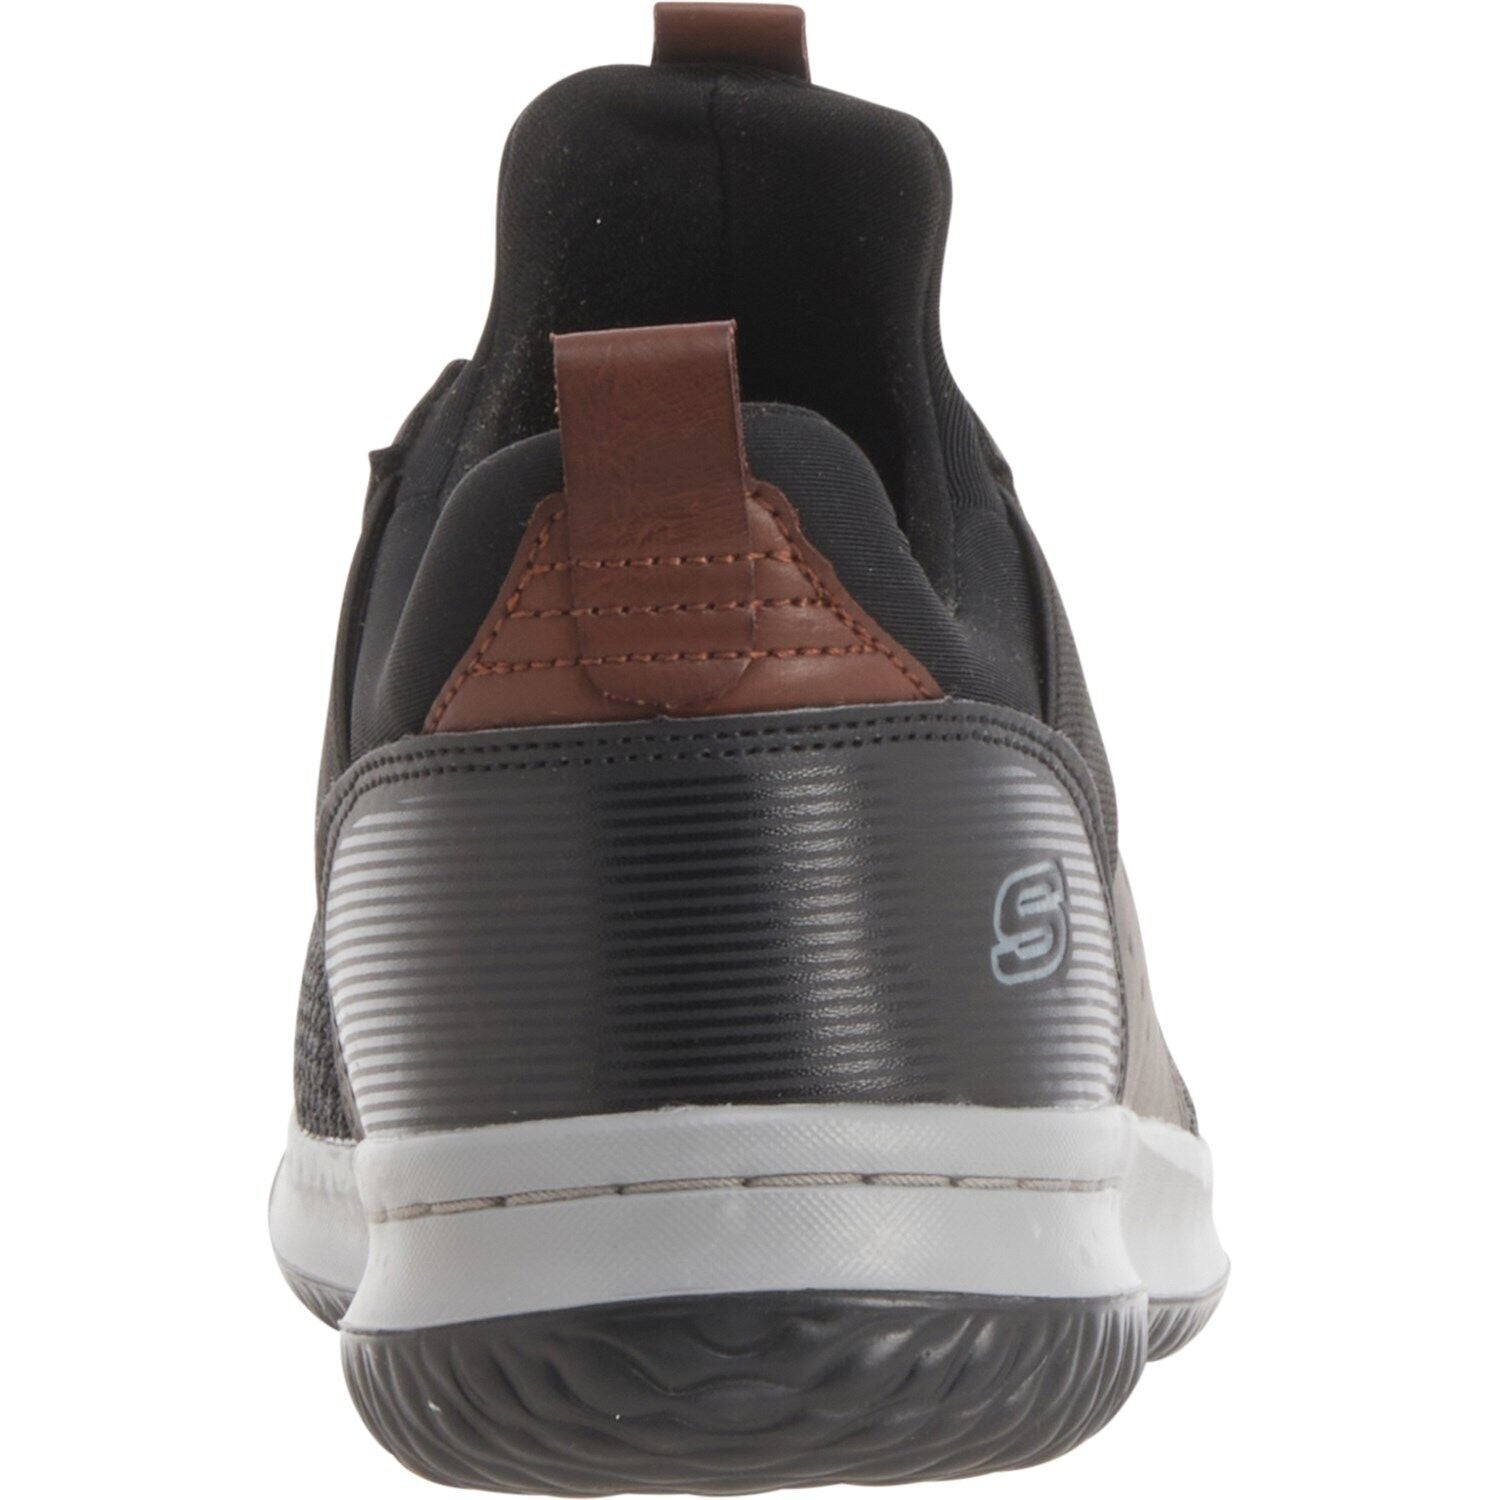 Skechers Mens Delson-Camben Shoes